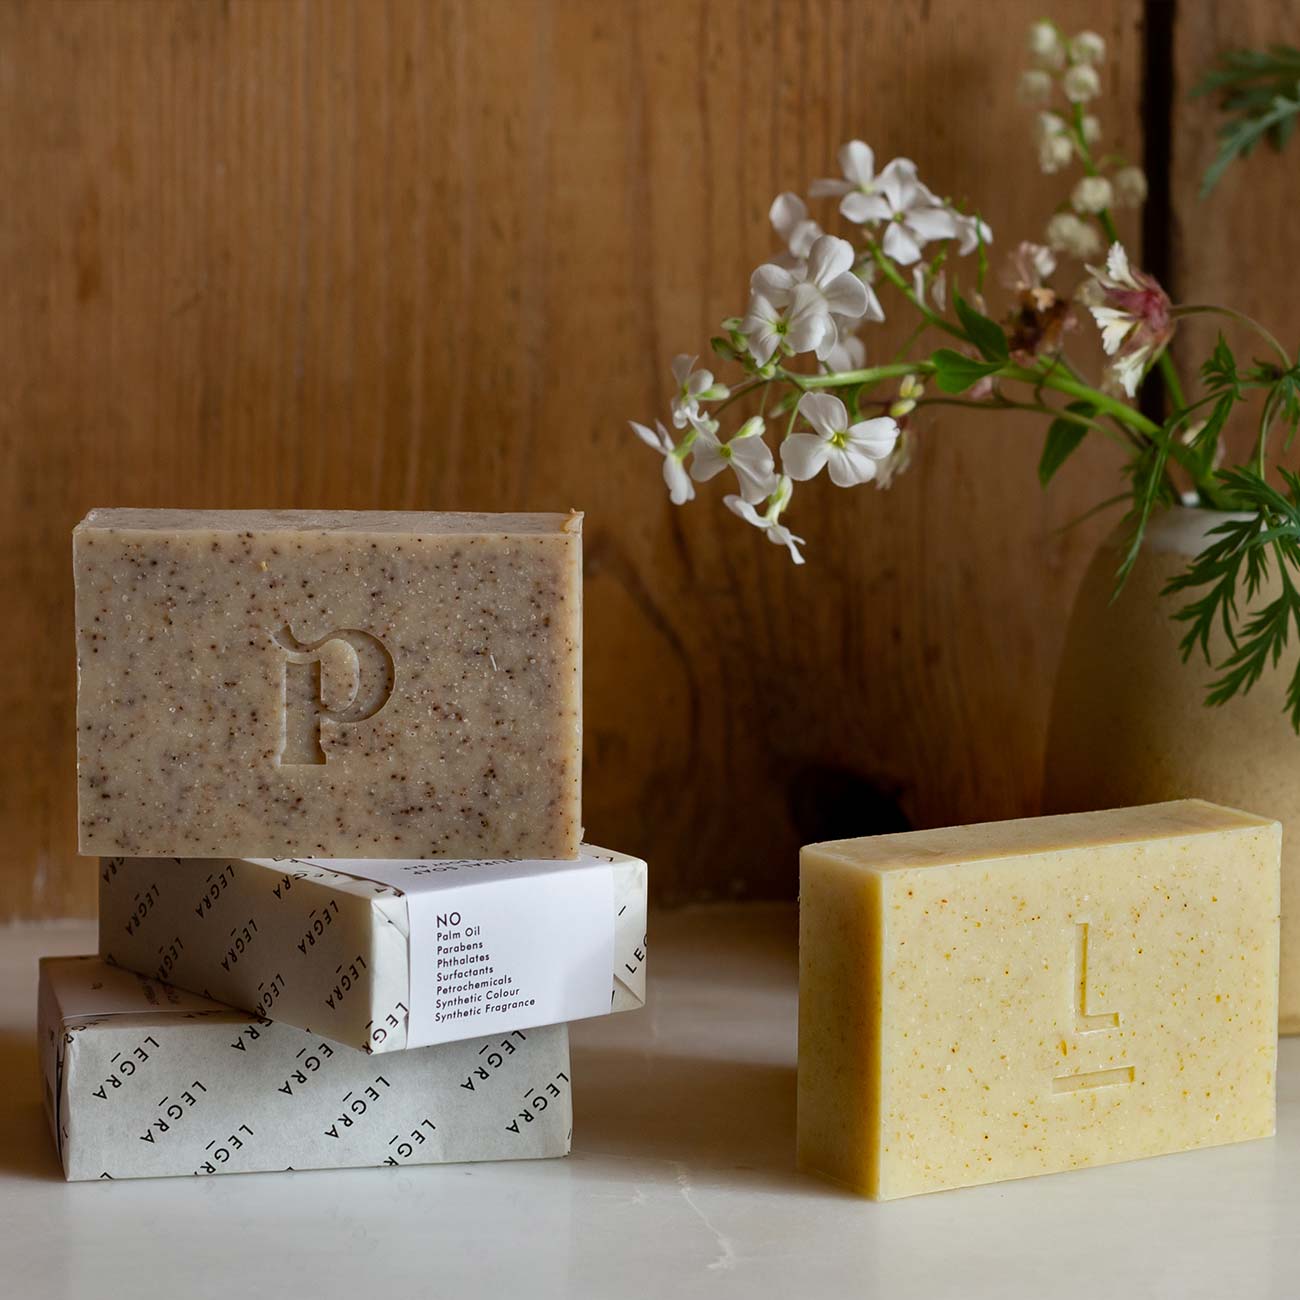 Oatmeal, Lavender and Clary Sage Soap x LEGRA